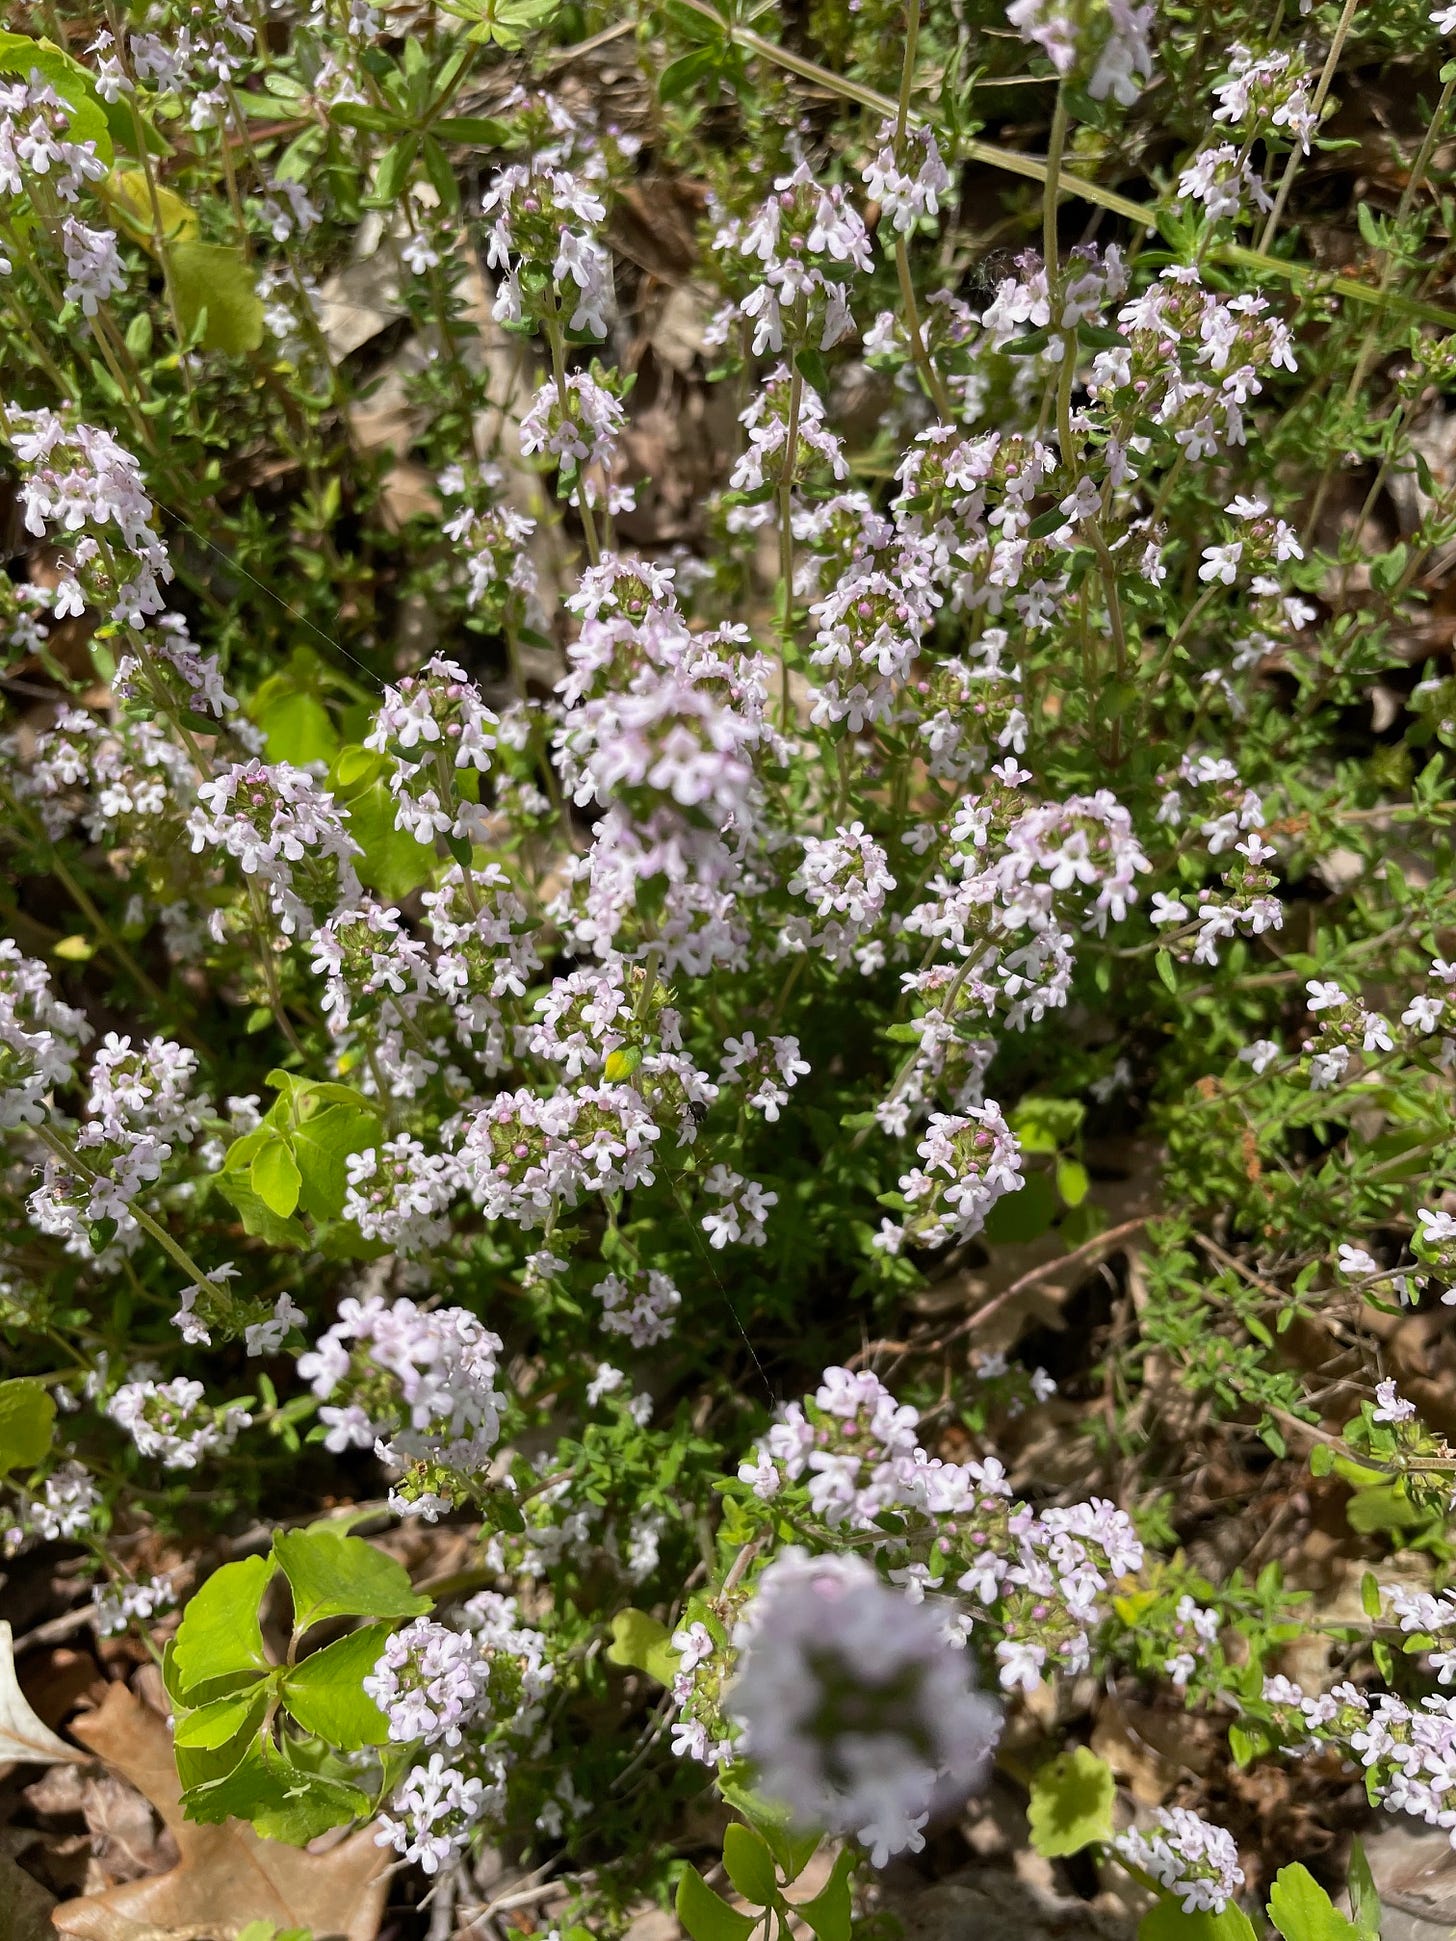 Thyme blooming among the weeds. 